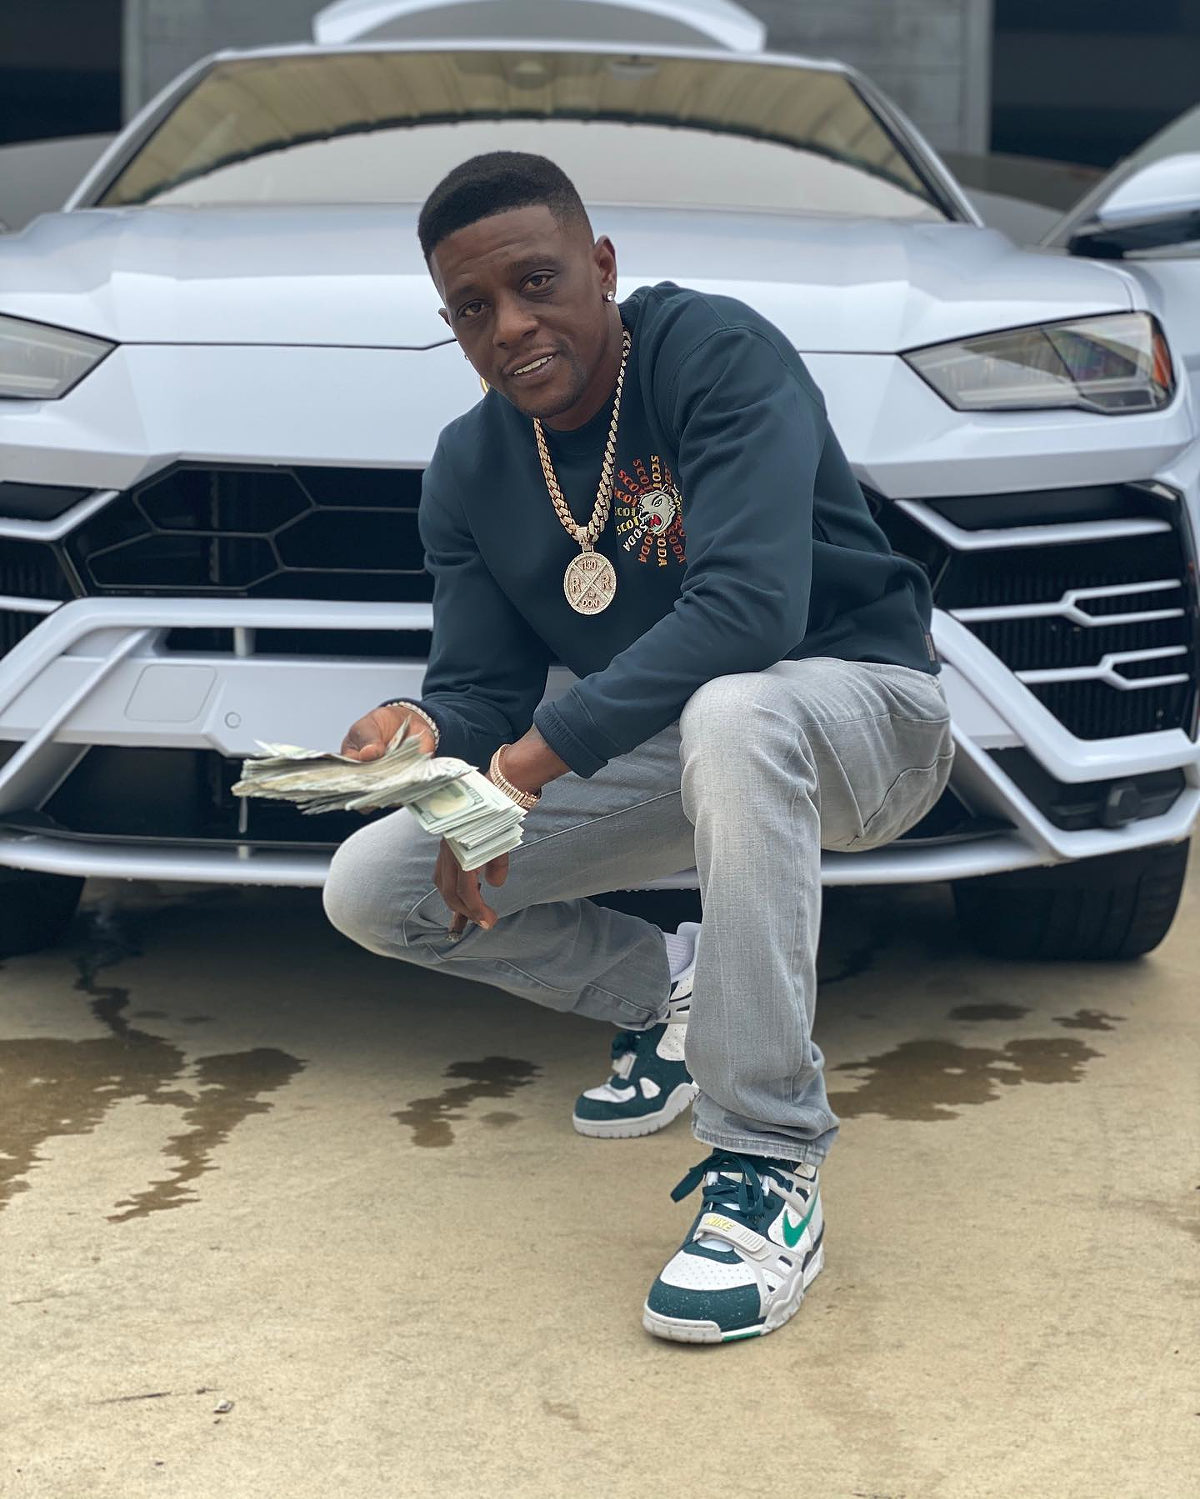 On Friday, Lil Boosie kicks off a weekend of Super Bowl concerts at